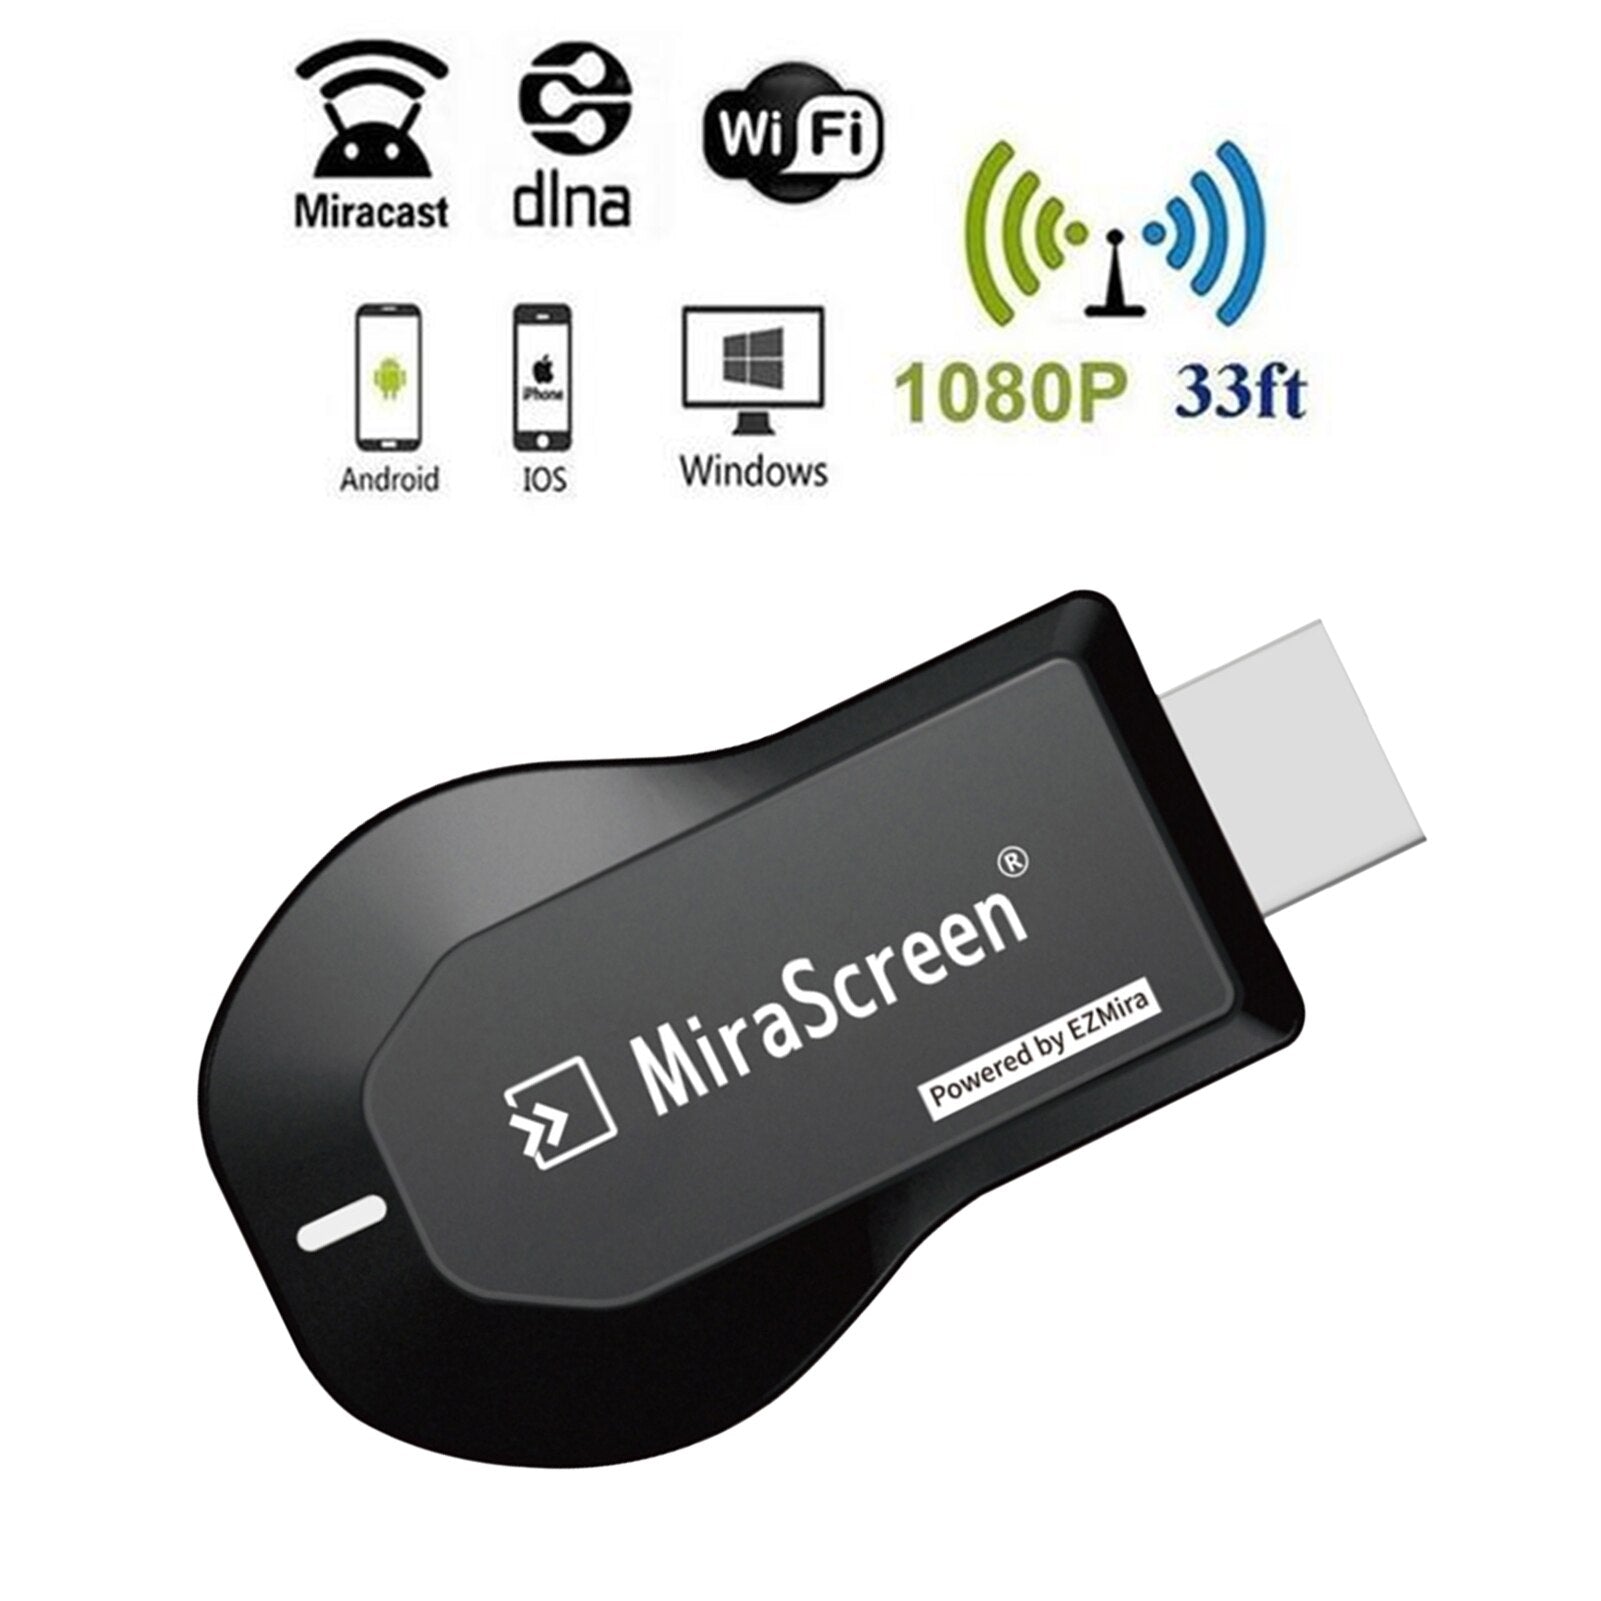 Anycast TV Stick 1080P Screen Mirror TV Dongle Wireless DLNA Display HDMI-Compatible Adapter Airplay Miracast For IOS Android